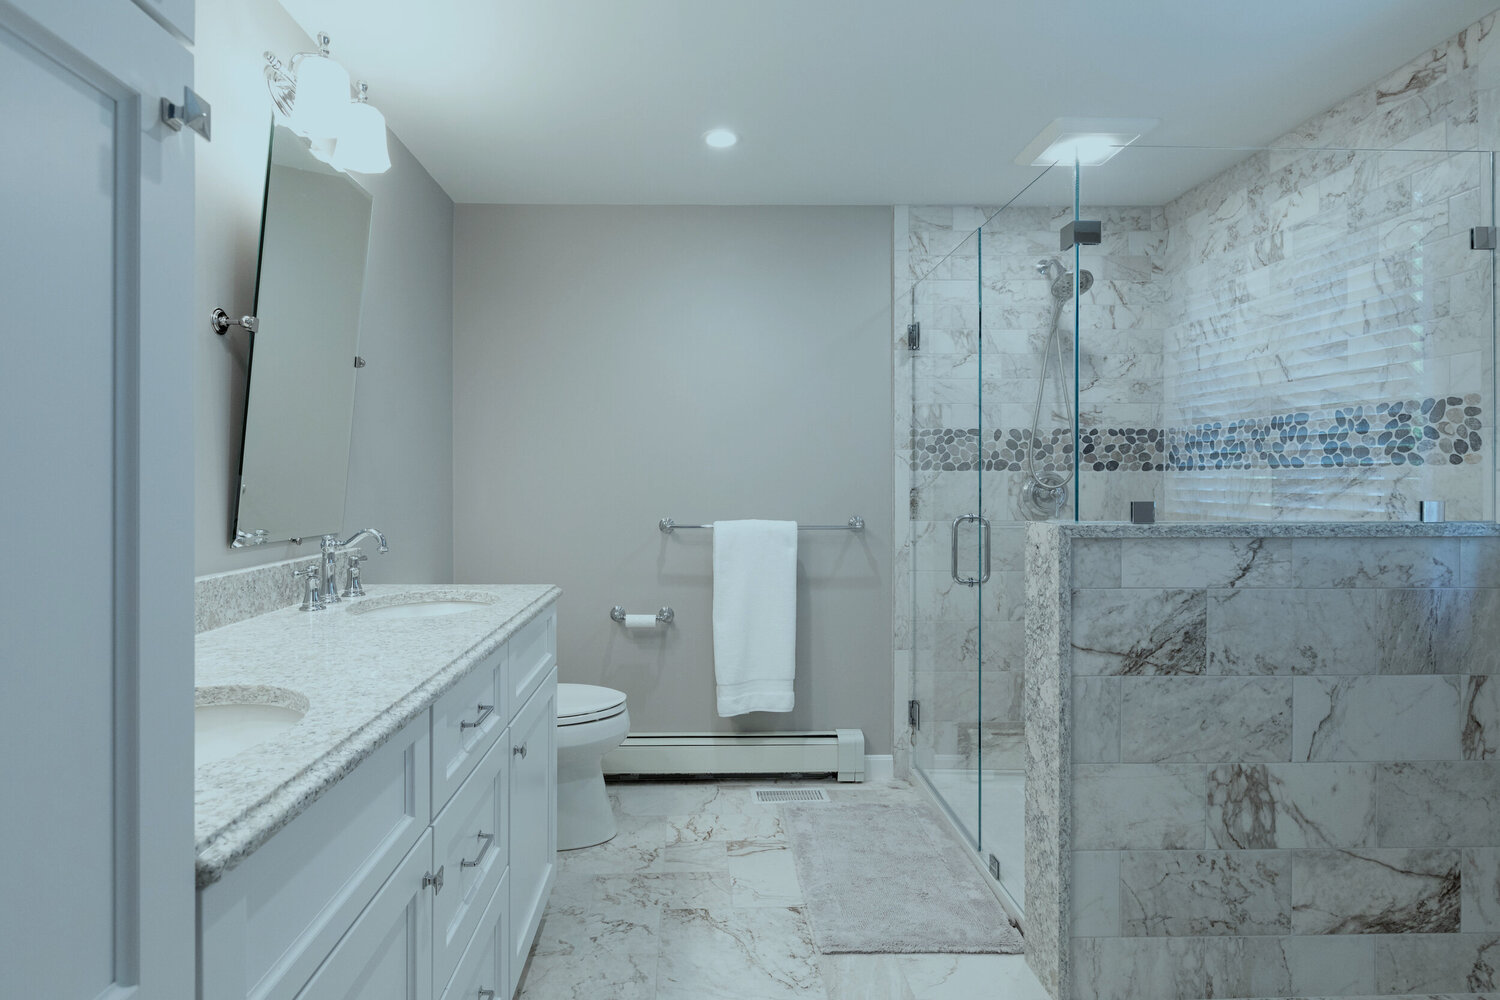 How Much Does a Bathroom Remodel Cost? - Bankrate